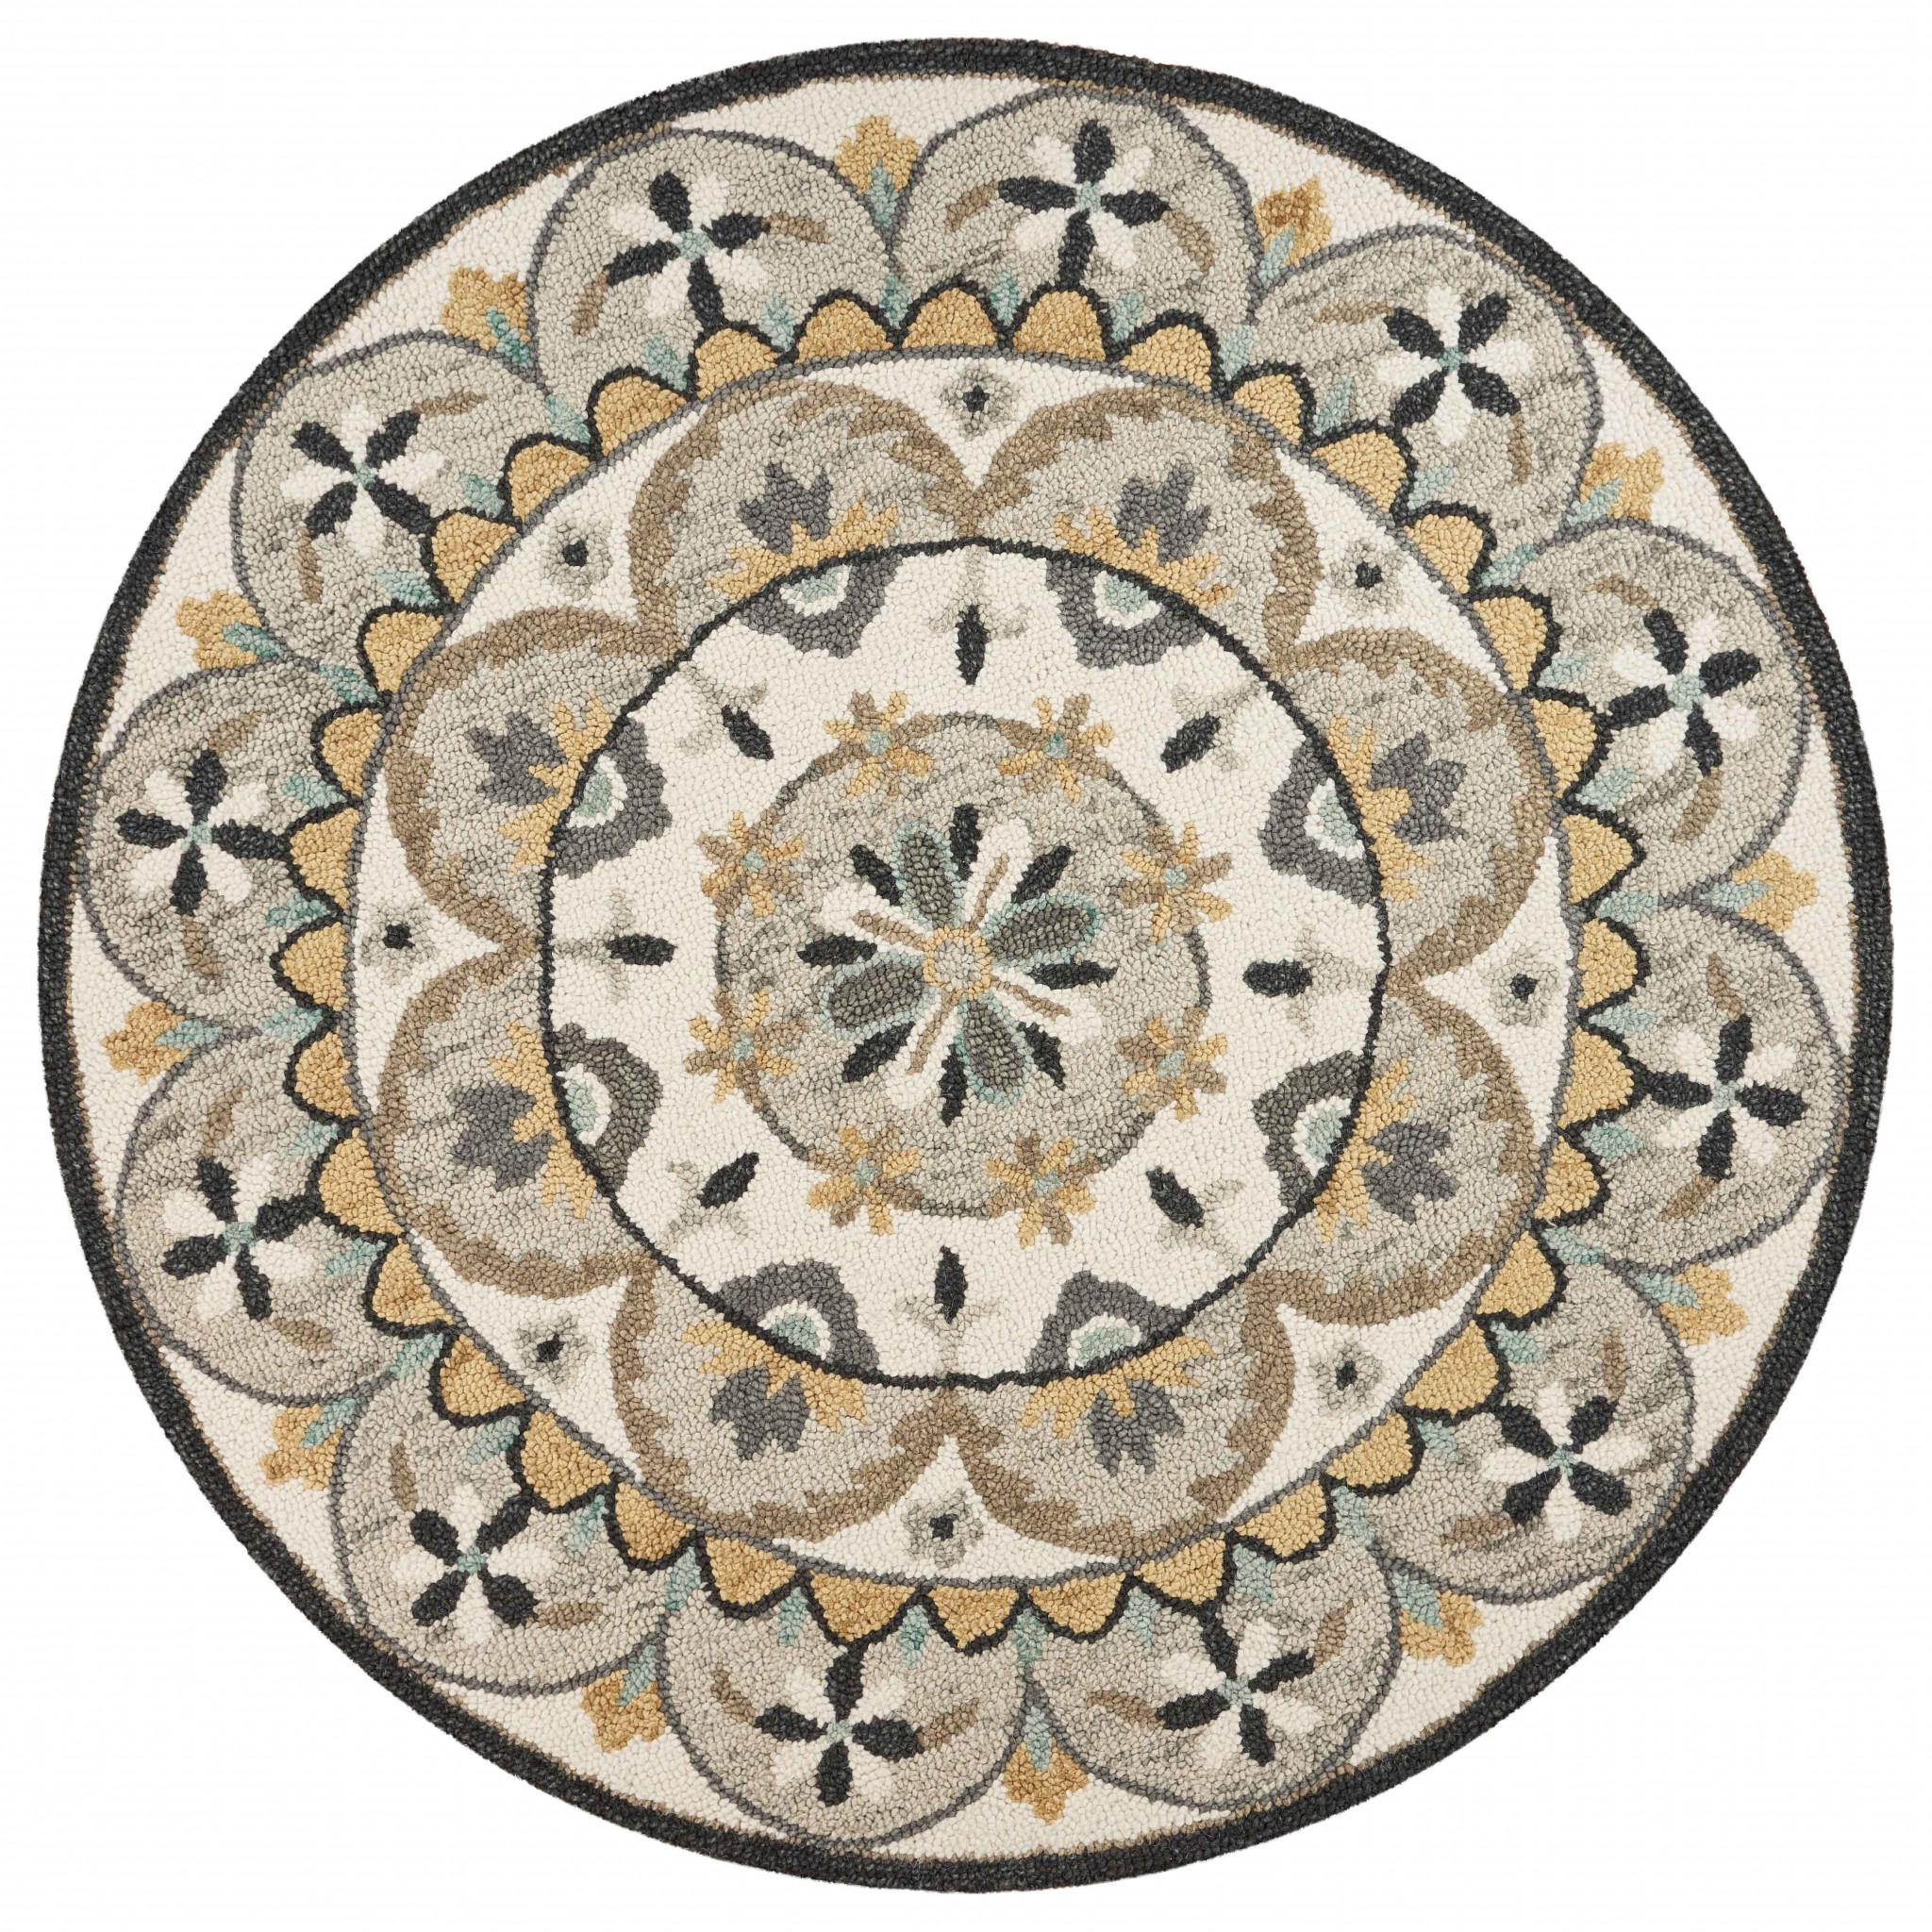 6' Gray And Black Round Wool Floral Dhurrie Handmade Area Rug-393686-1